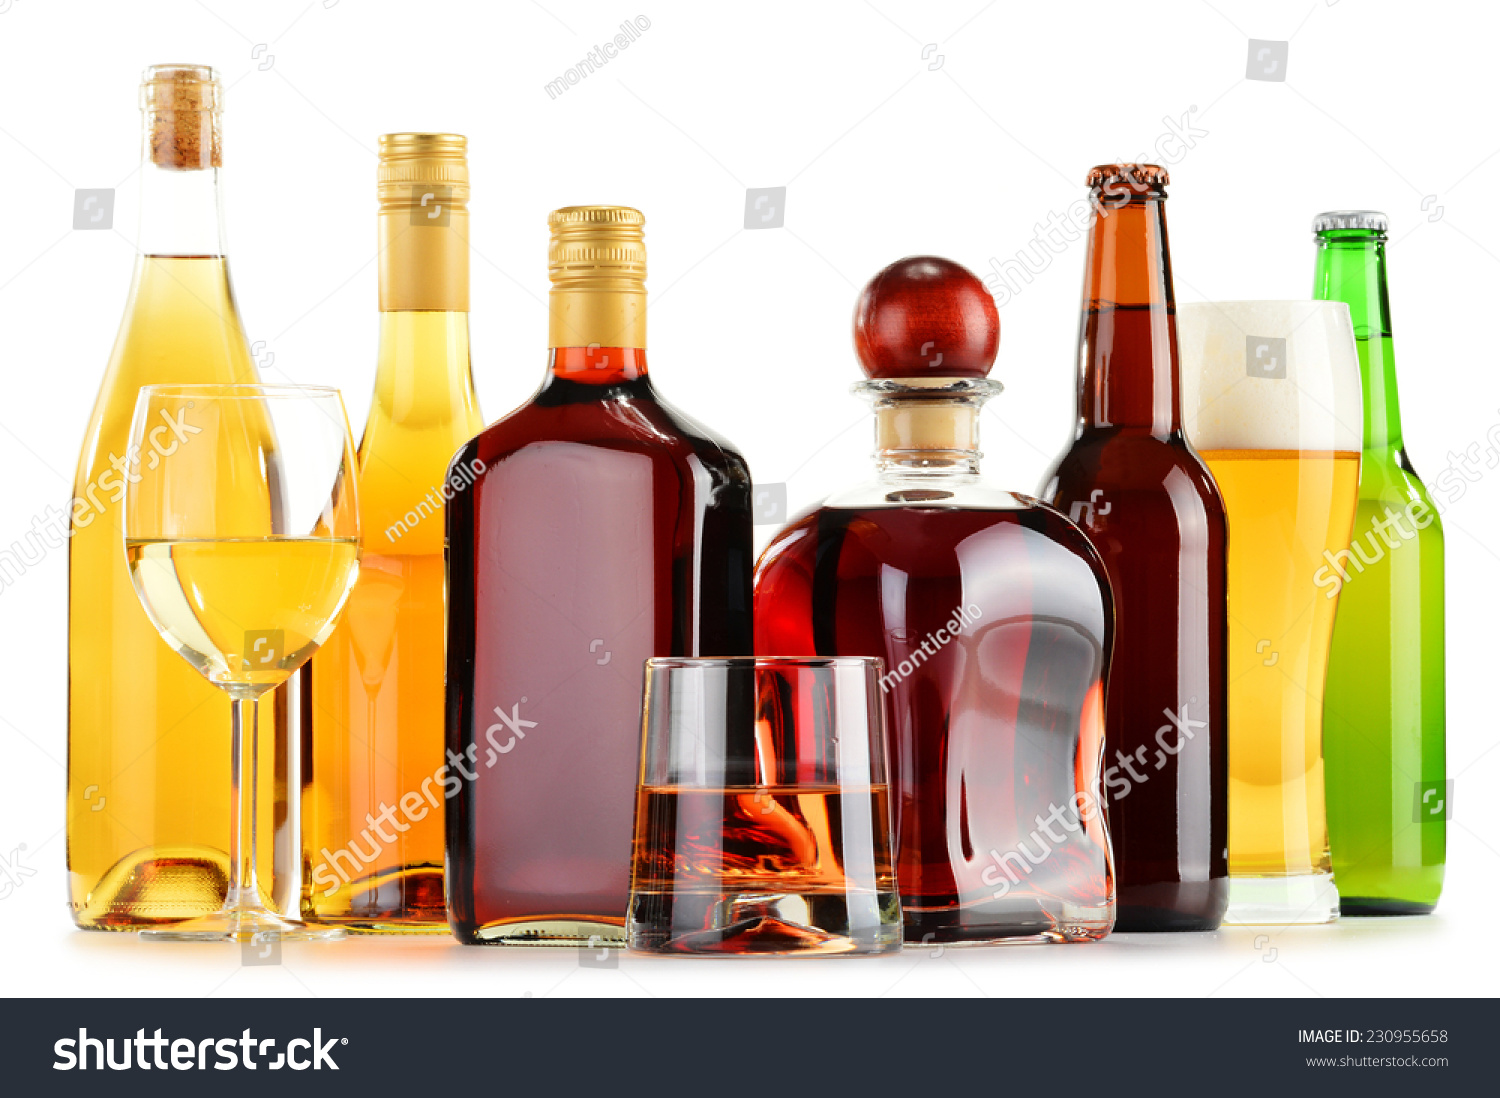 Bottles and glasses of assorted alcoholic beverages isolated on white background #230955658